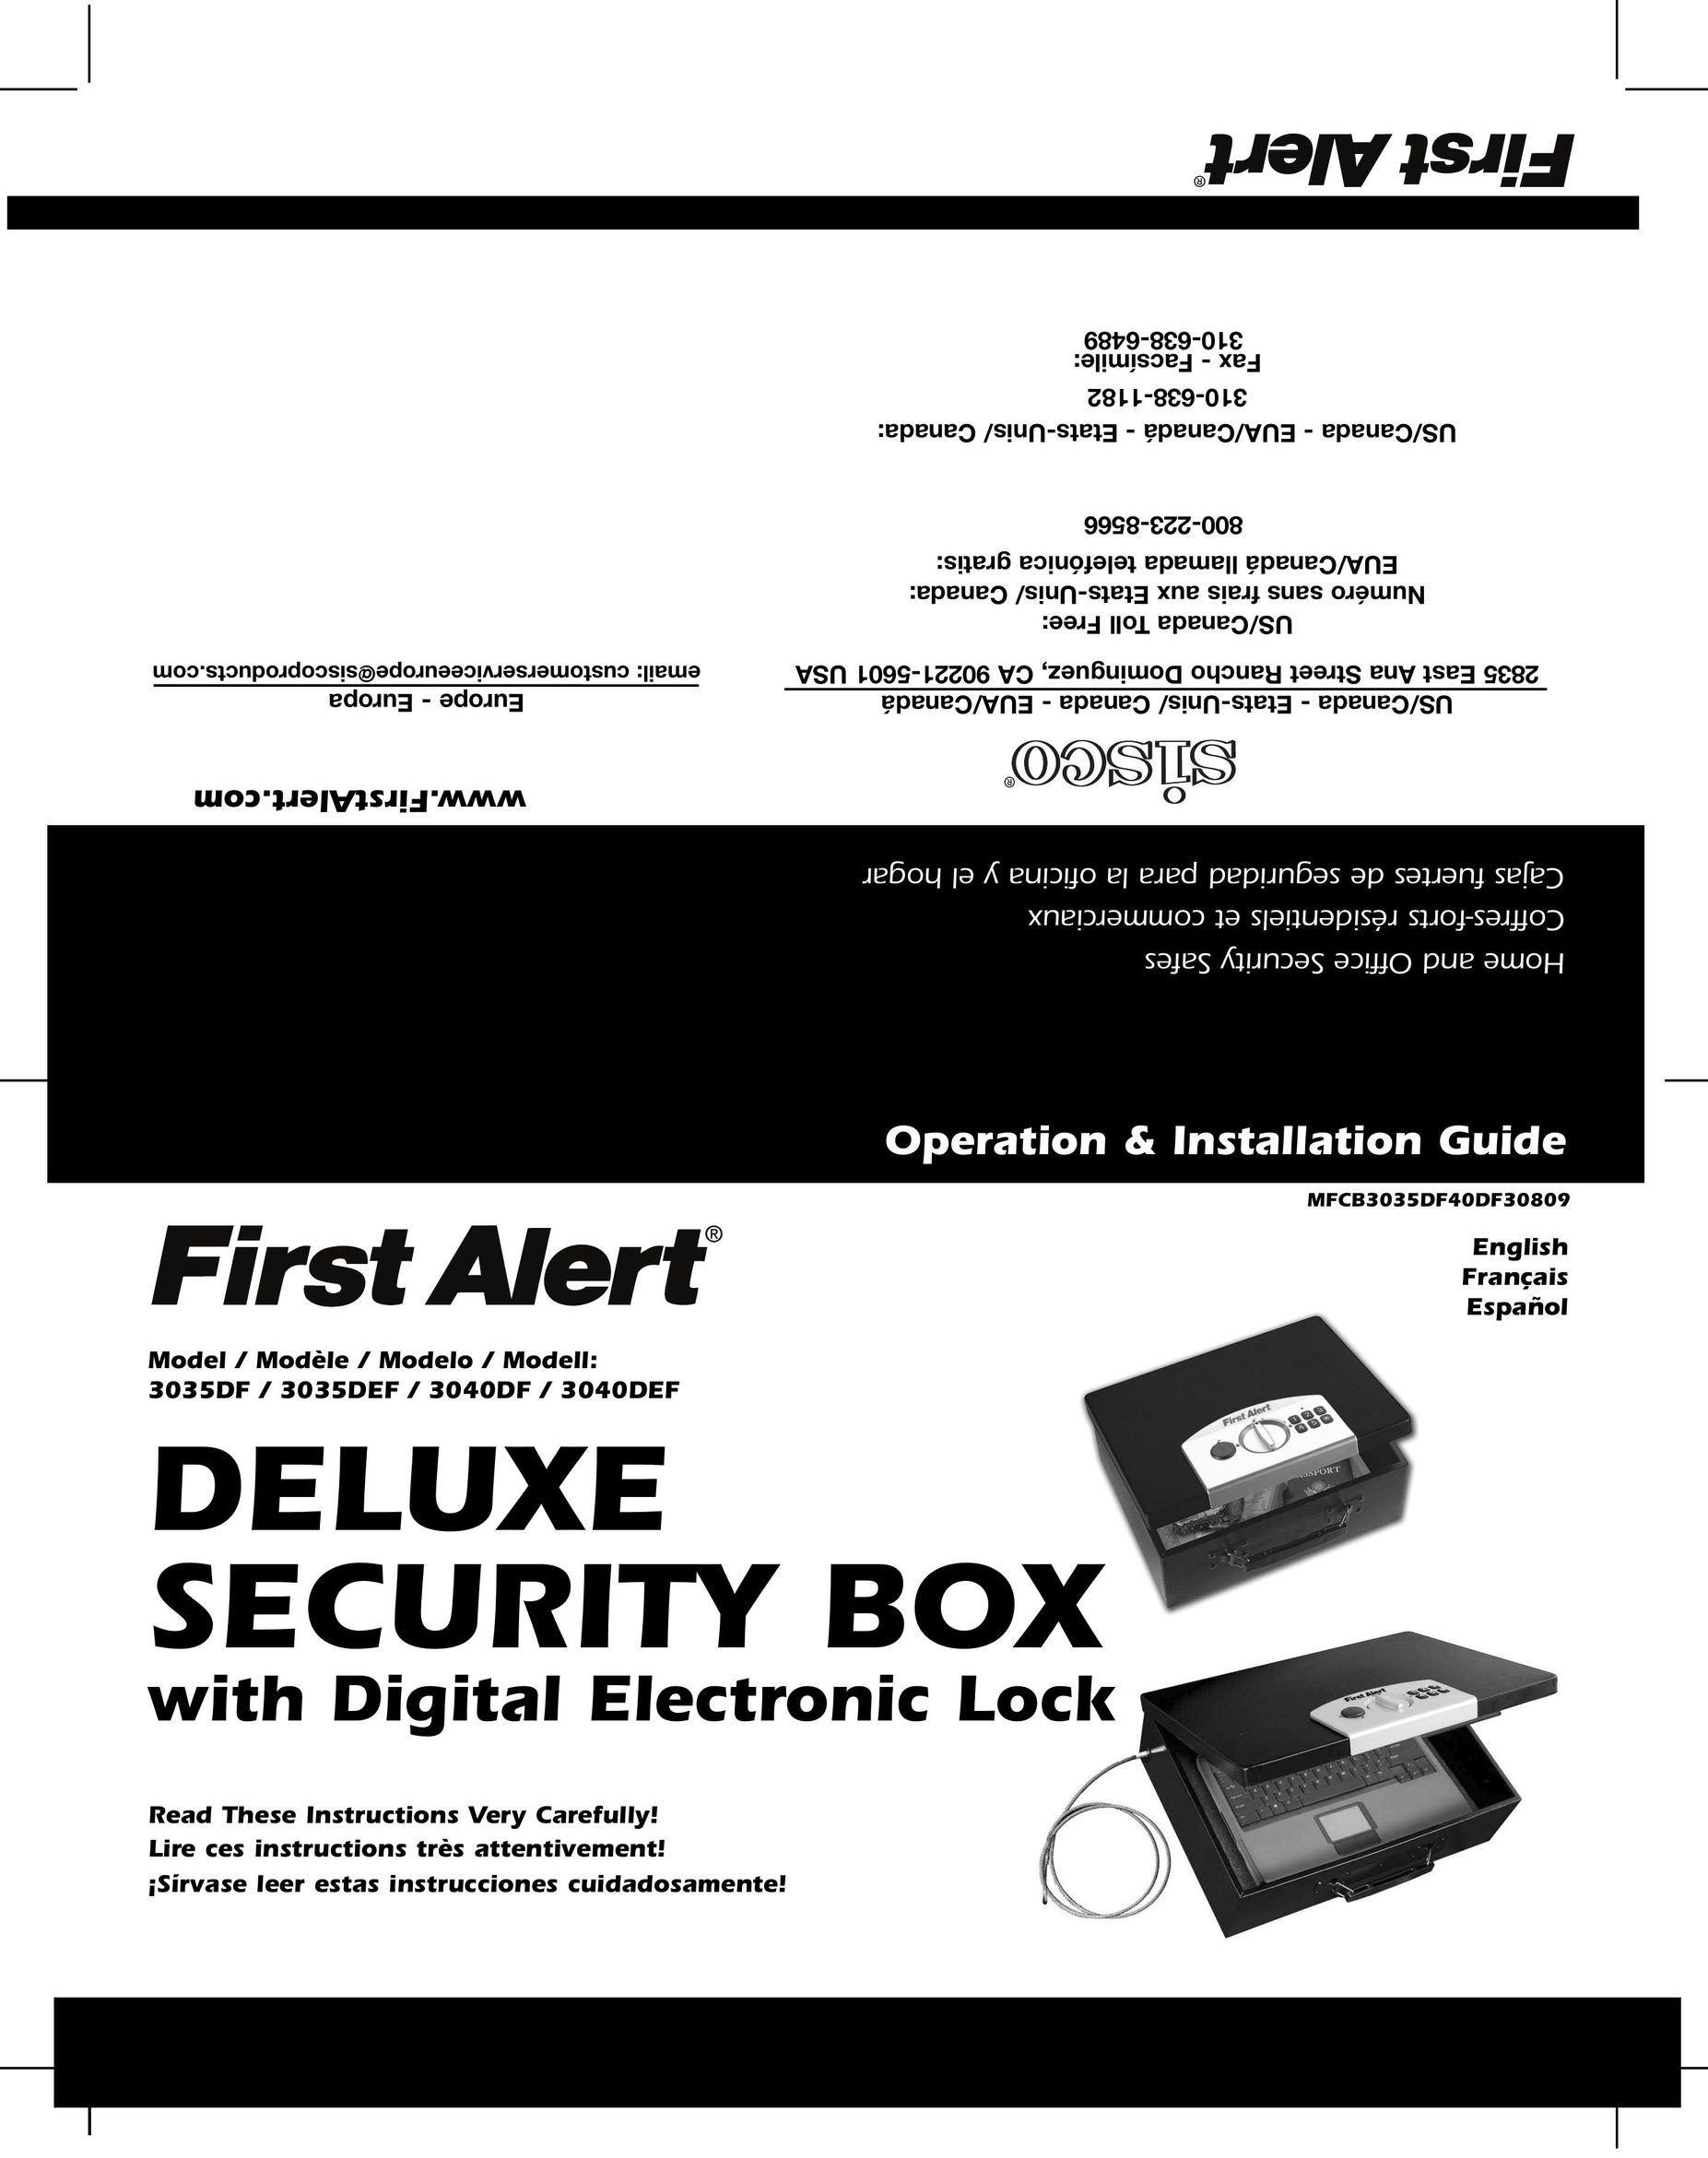 First Alert 3035DF Home Security System User Manual